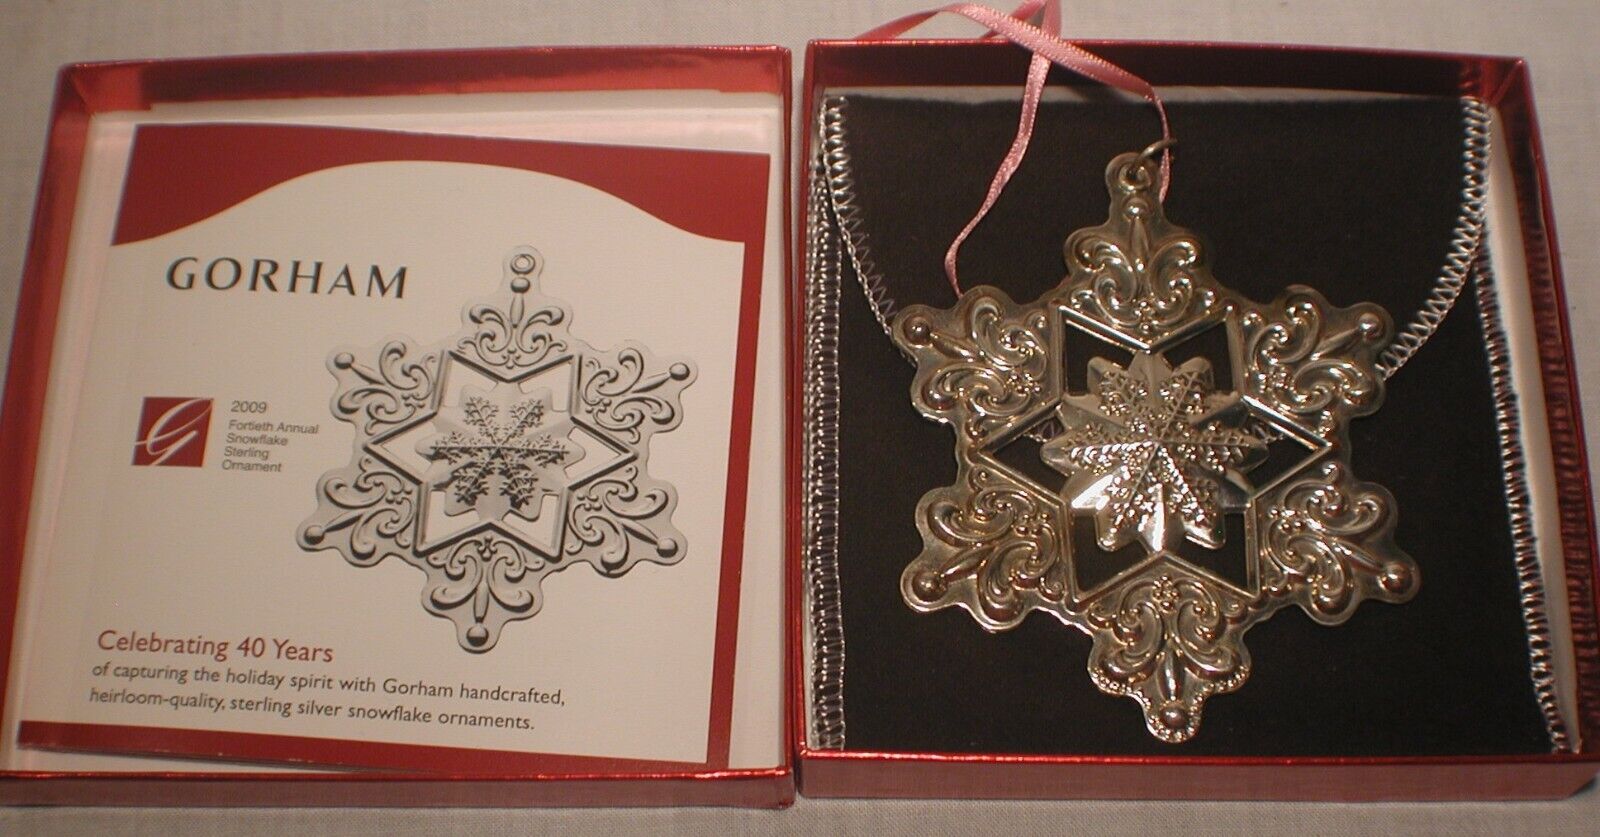  Gorham Sterling Silver Snowflake Christmas 2009 Fortieth Annual Ornament